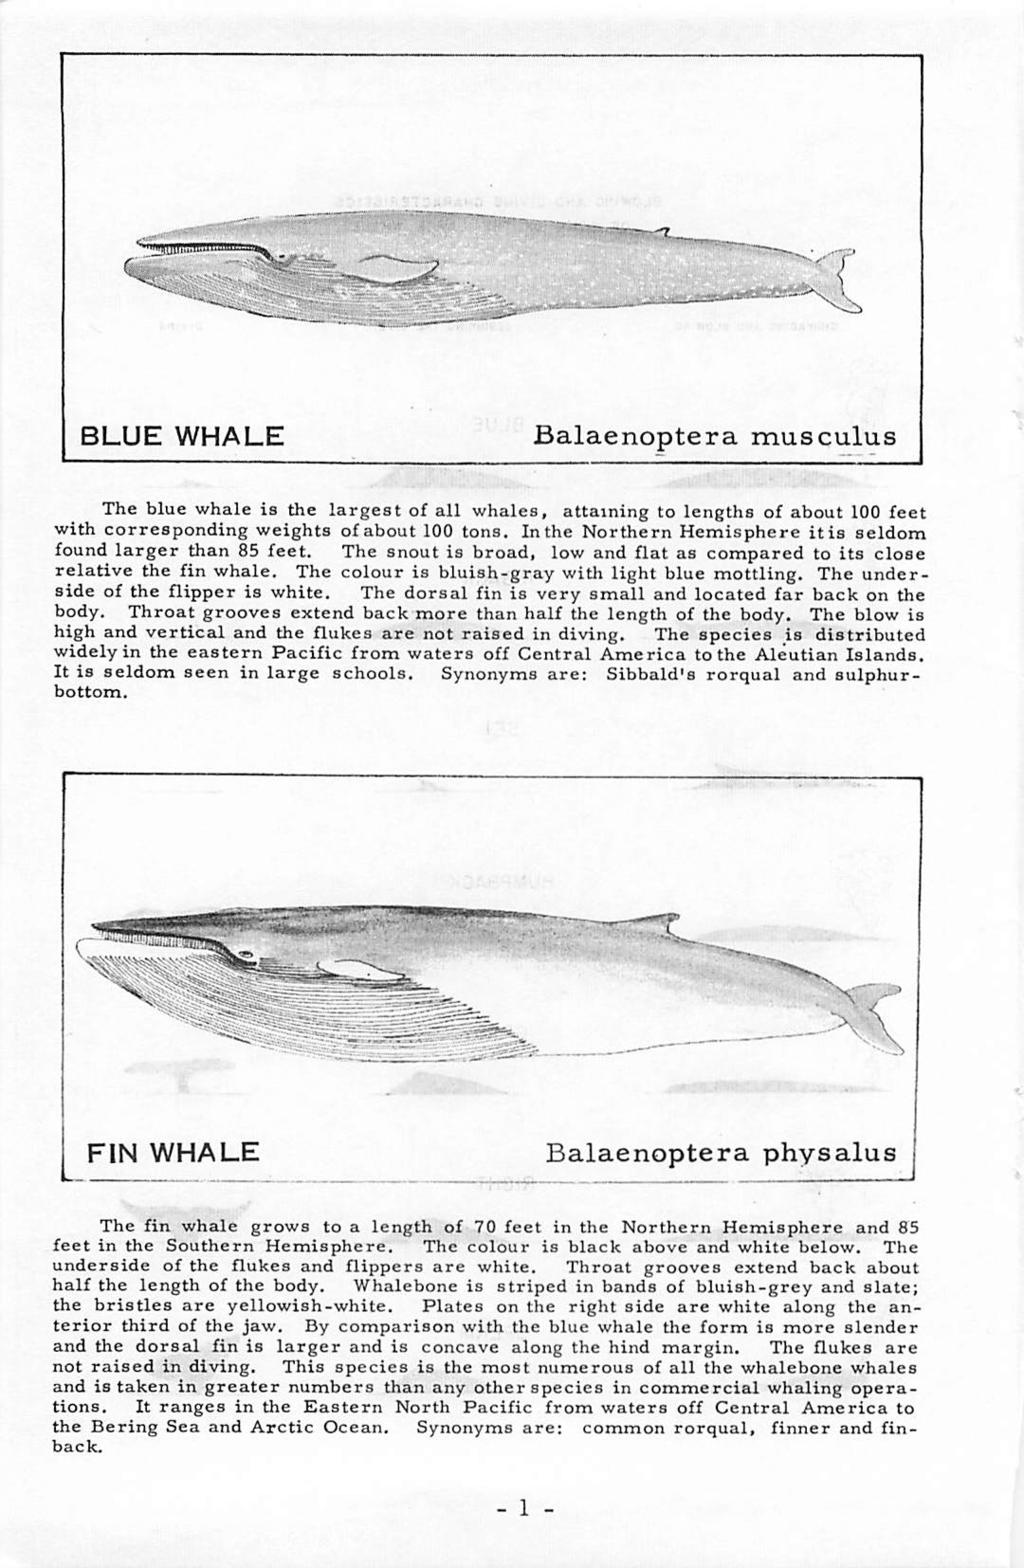 _. L. BLUE WHALE Balaenoptera musculus The blue whale is the largest of all whales, attaining to lengths of about 100 feet with corresponding weights of about 100 tons.